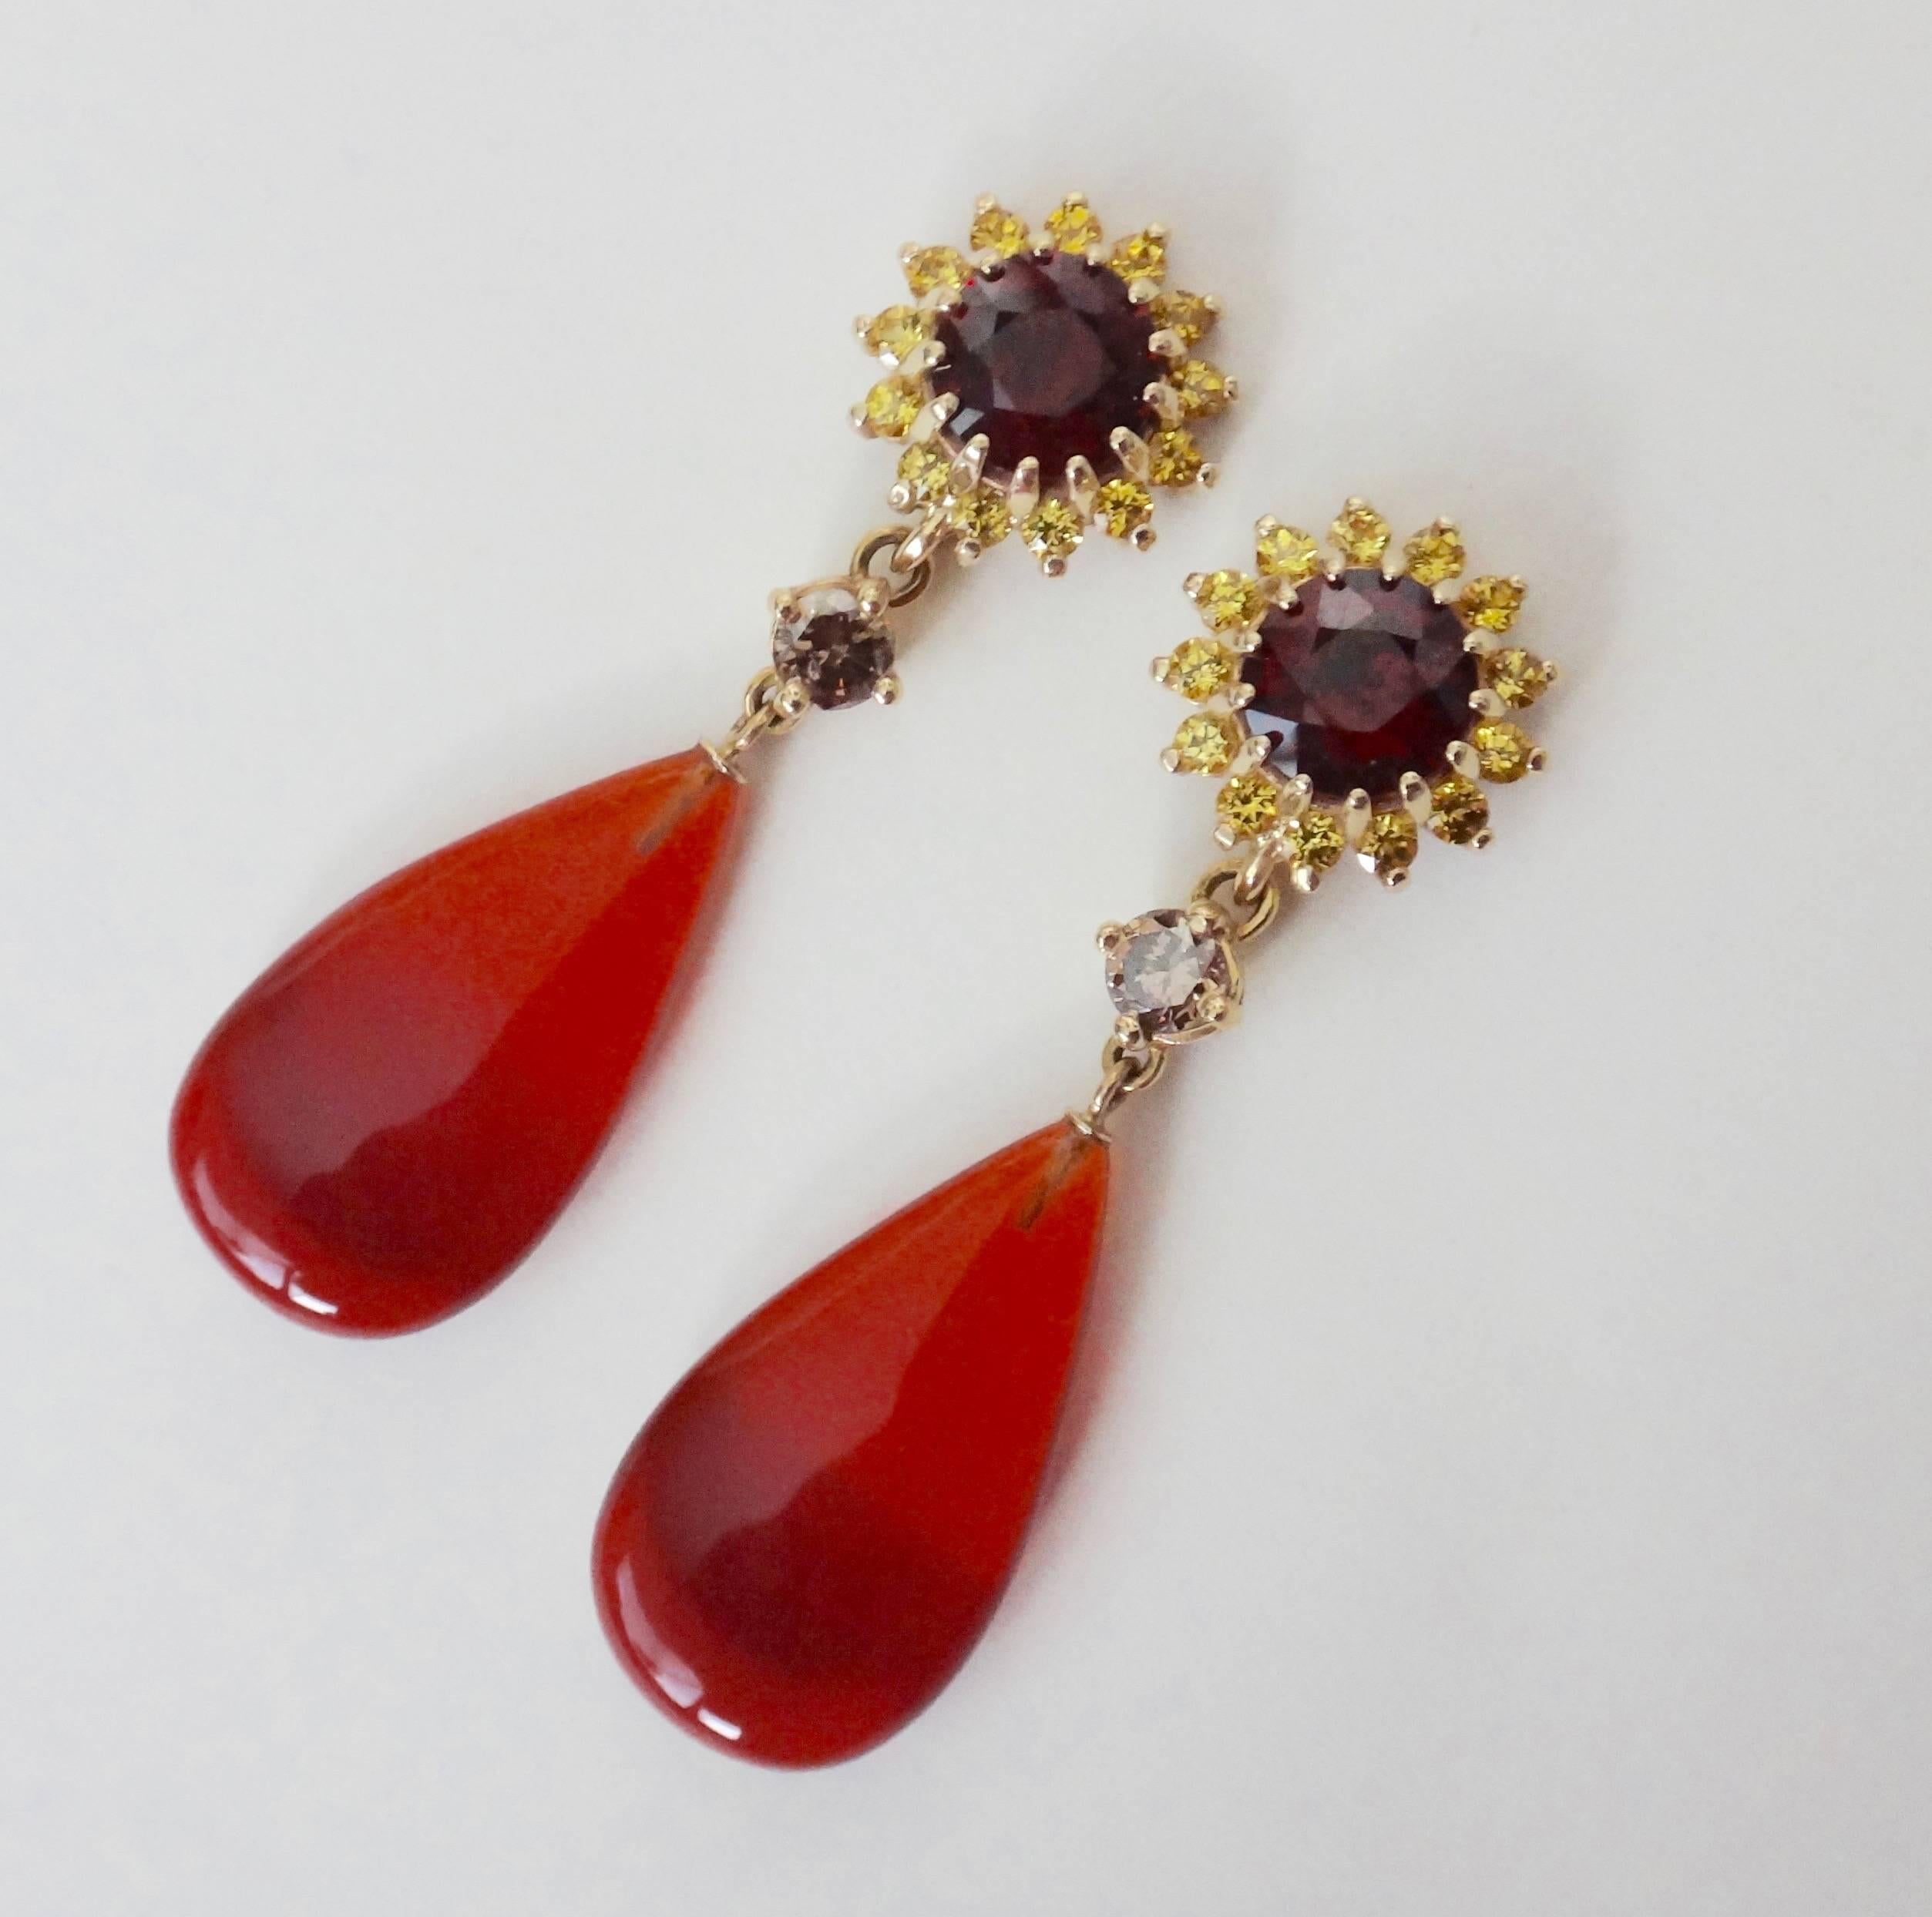 Brilliant cut Almandine garnets (Origin: Sri Lanka) are surrounded by bright yellow sapphires and further decorated with cognac colored diamonds and a very unusual pair of perfectly matched Mexican fire opals.  The highly polished drops are